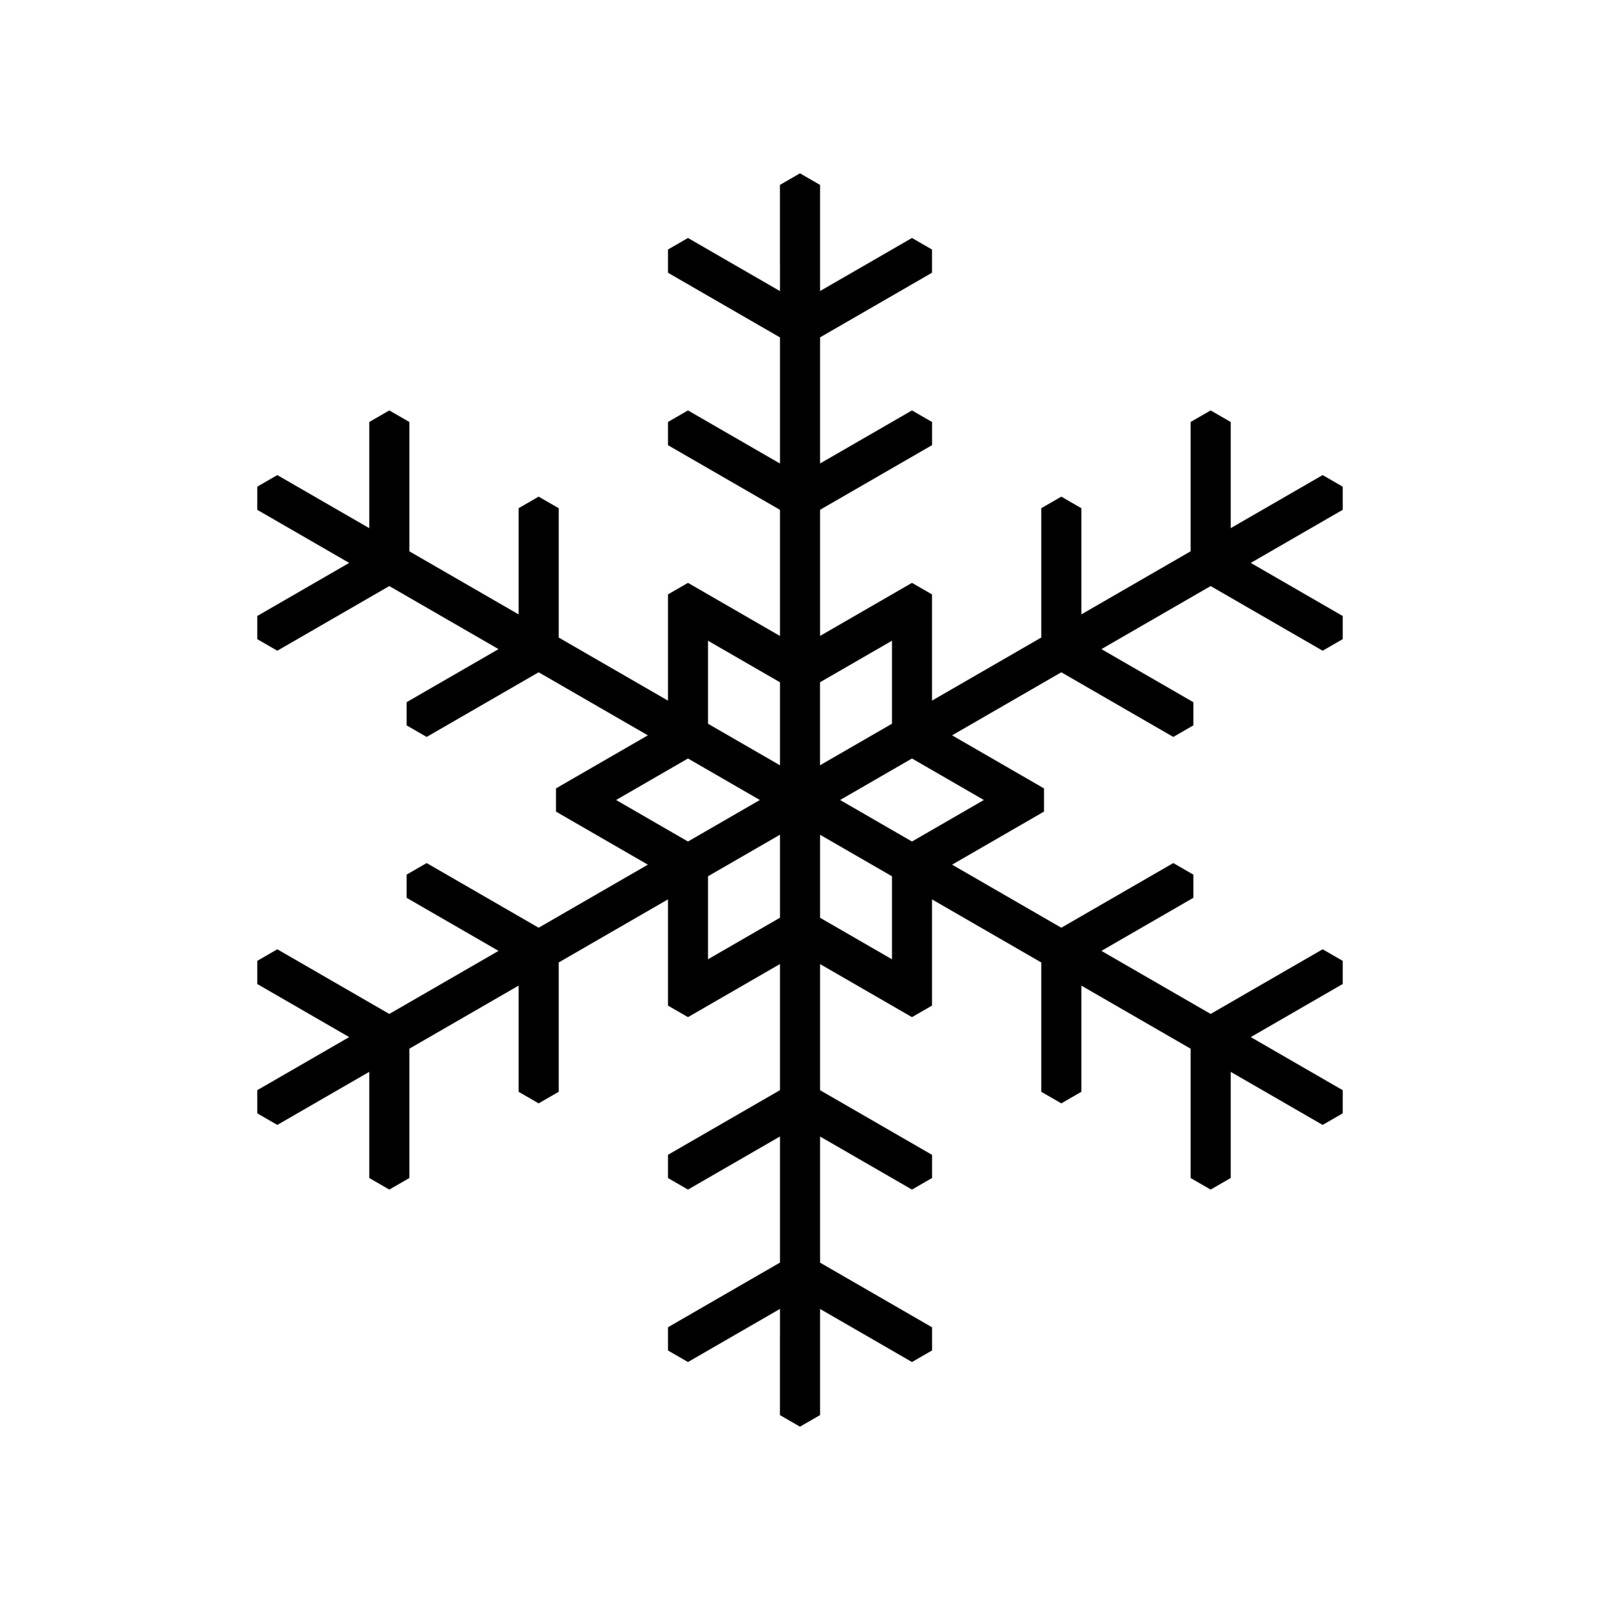 Snowflake icon. Christmas and winter theme. Simple flat black illustration on white background by pyty